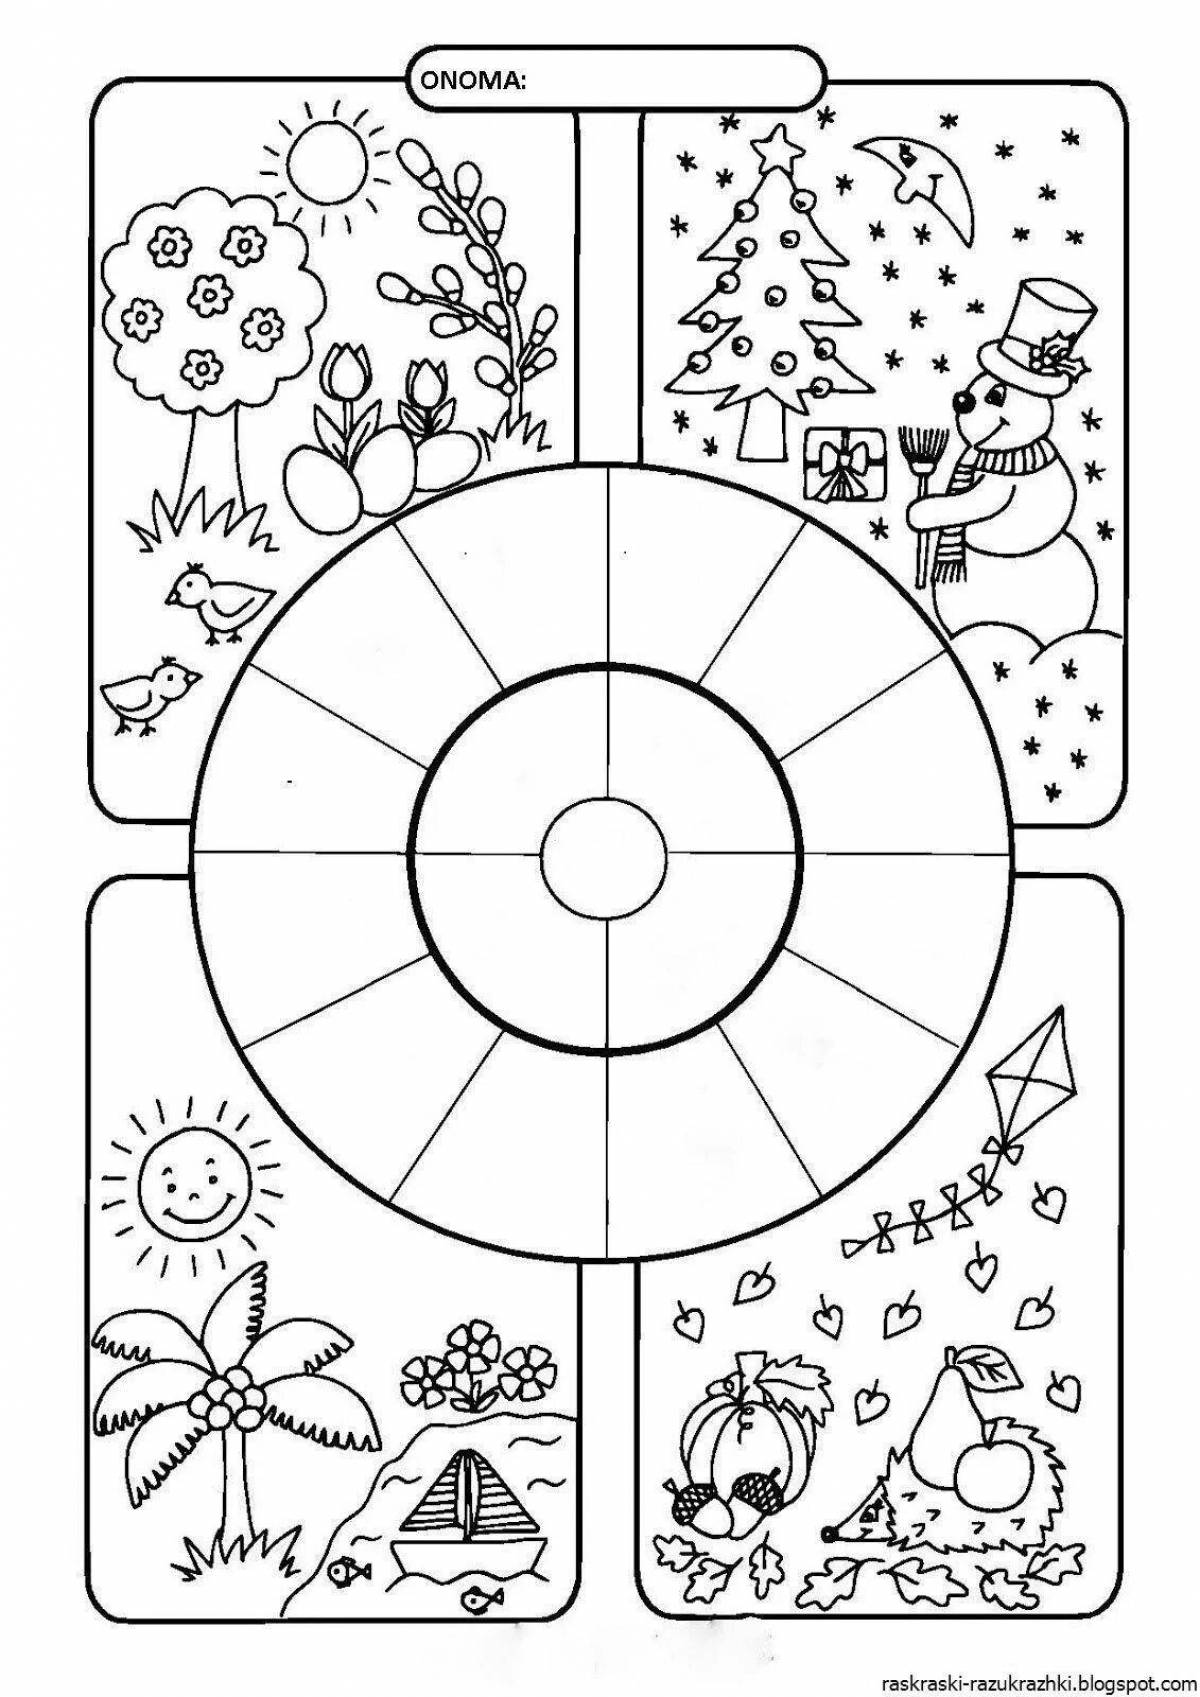 Fun summer coloring for kids